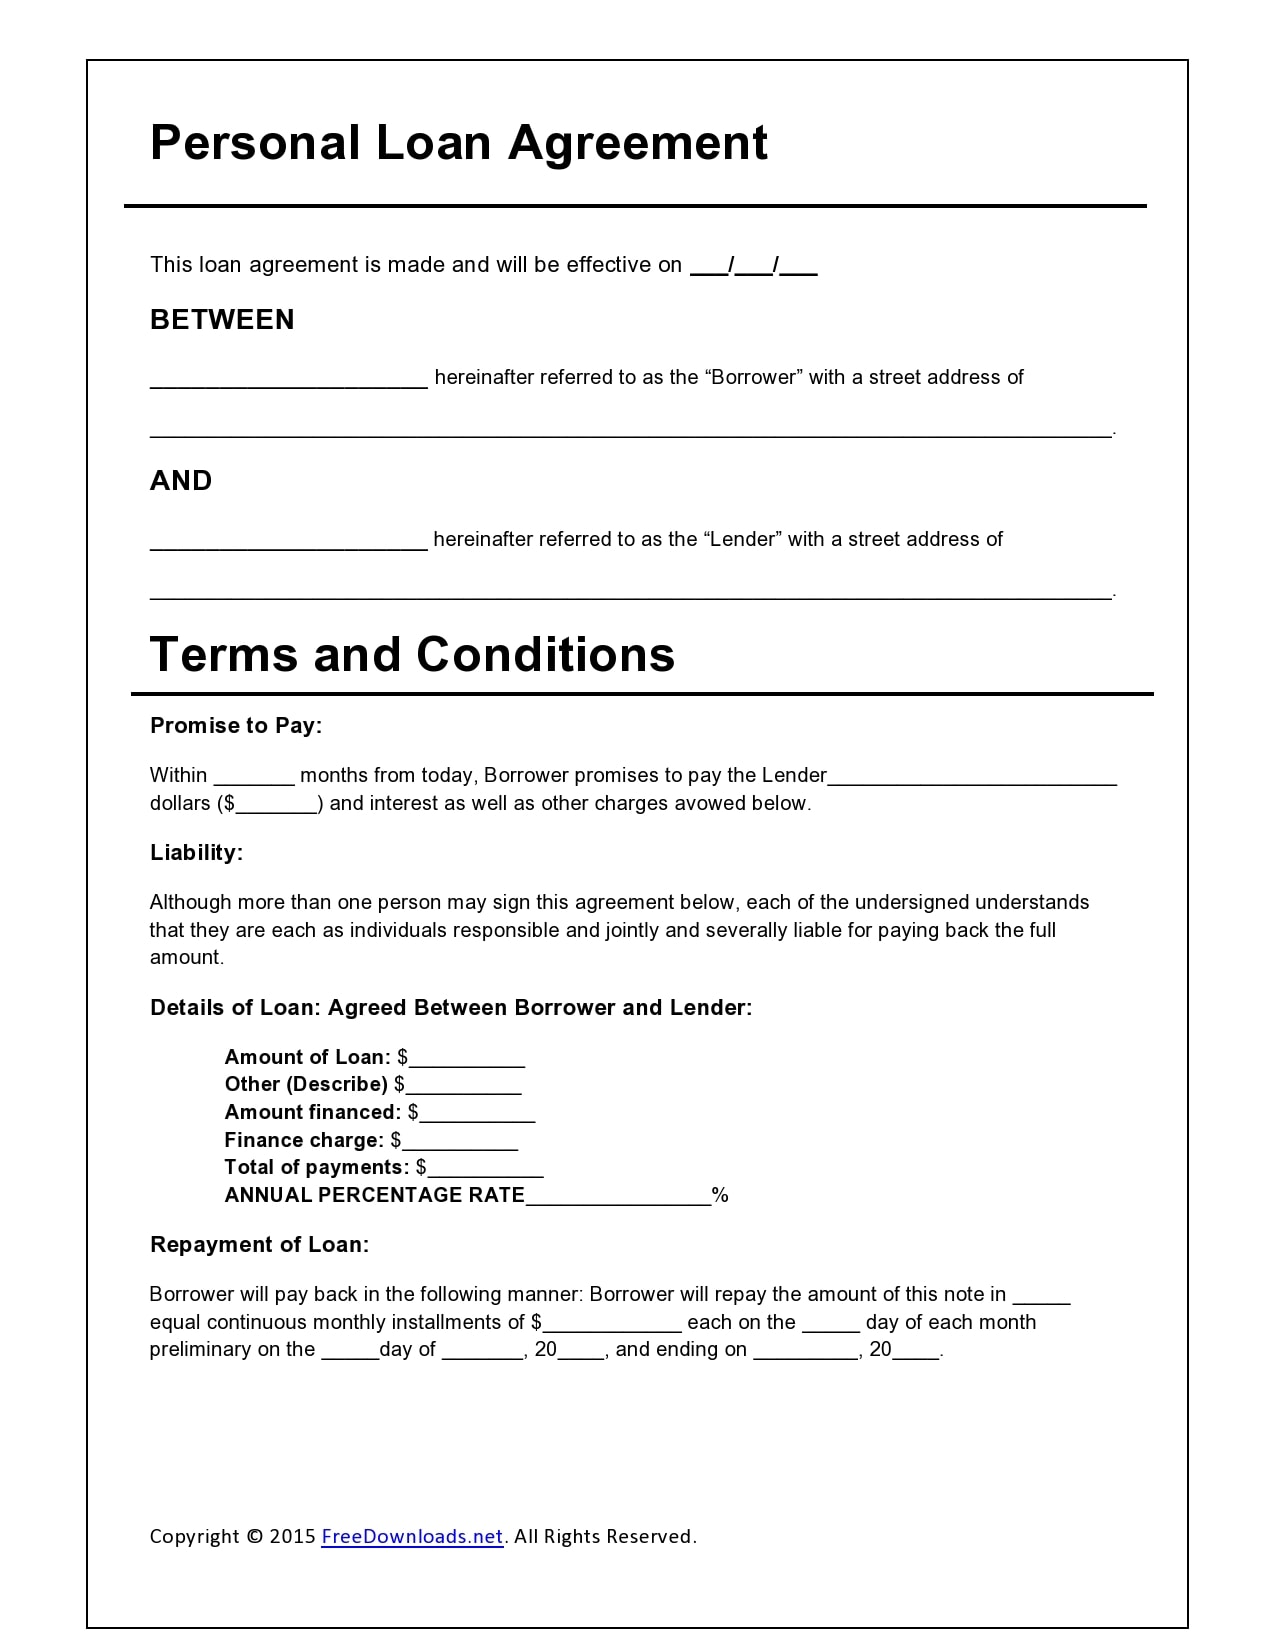 21 Simple Family Loan Agreement Templates (21% Free) Inside cash loan agreement template free